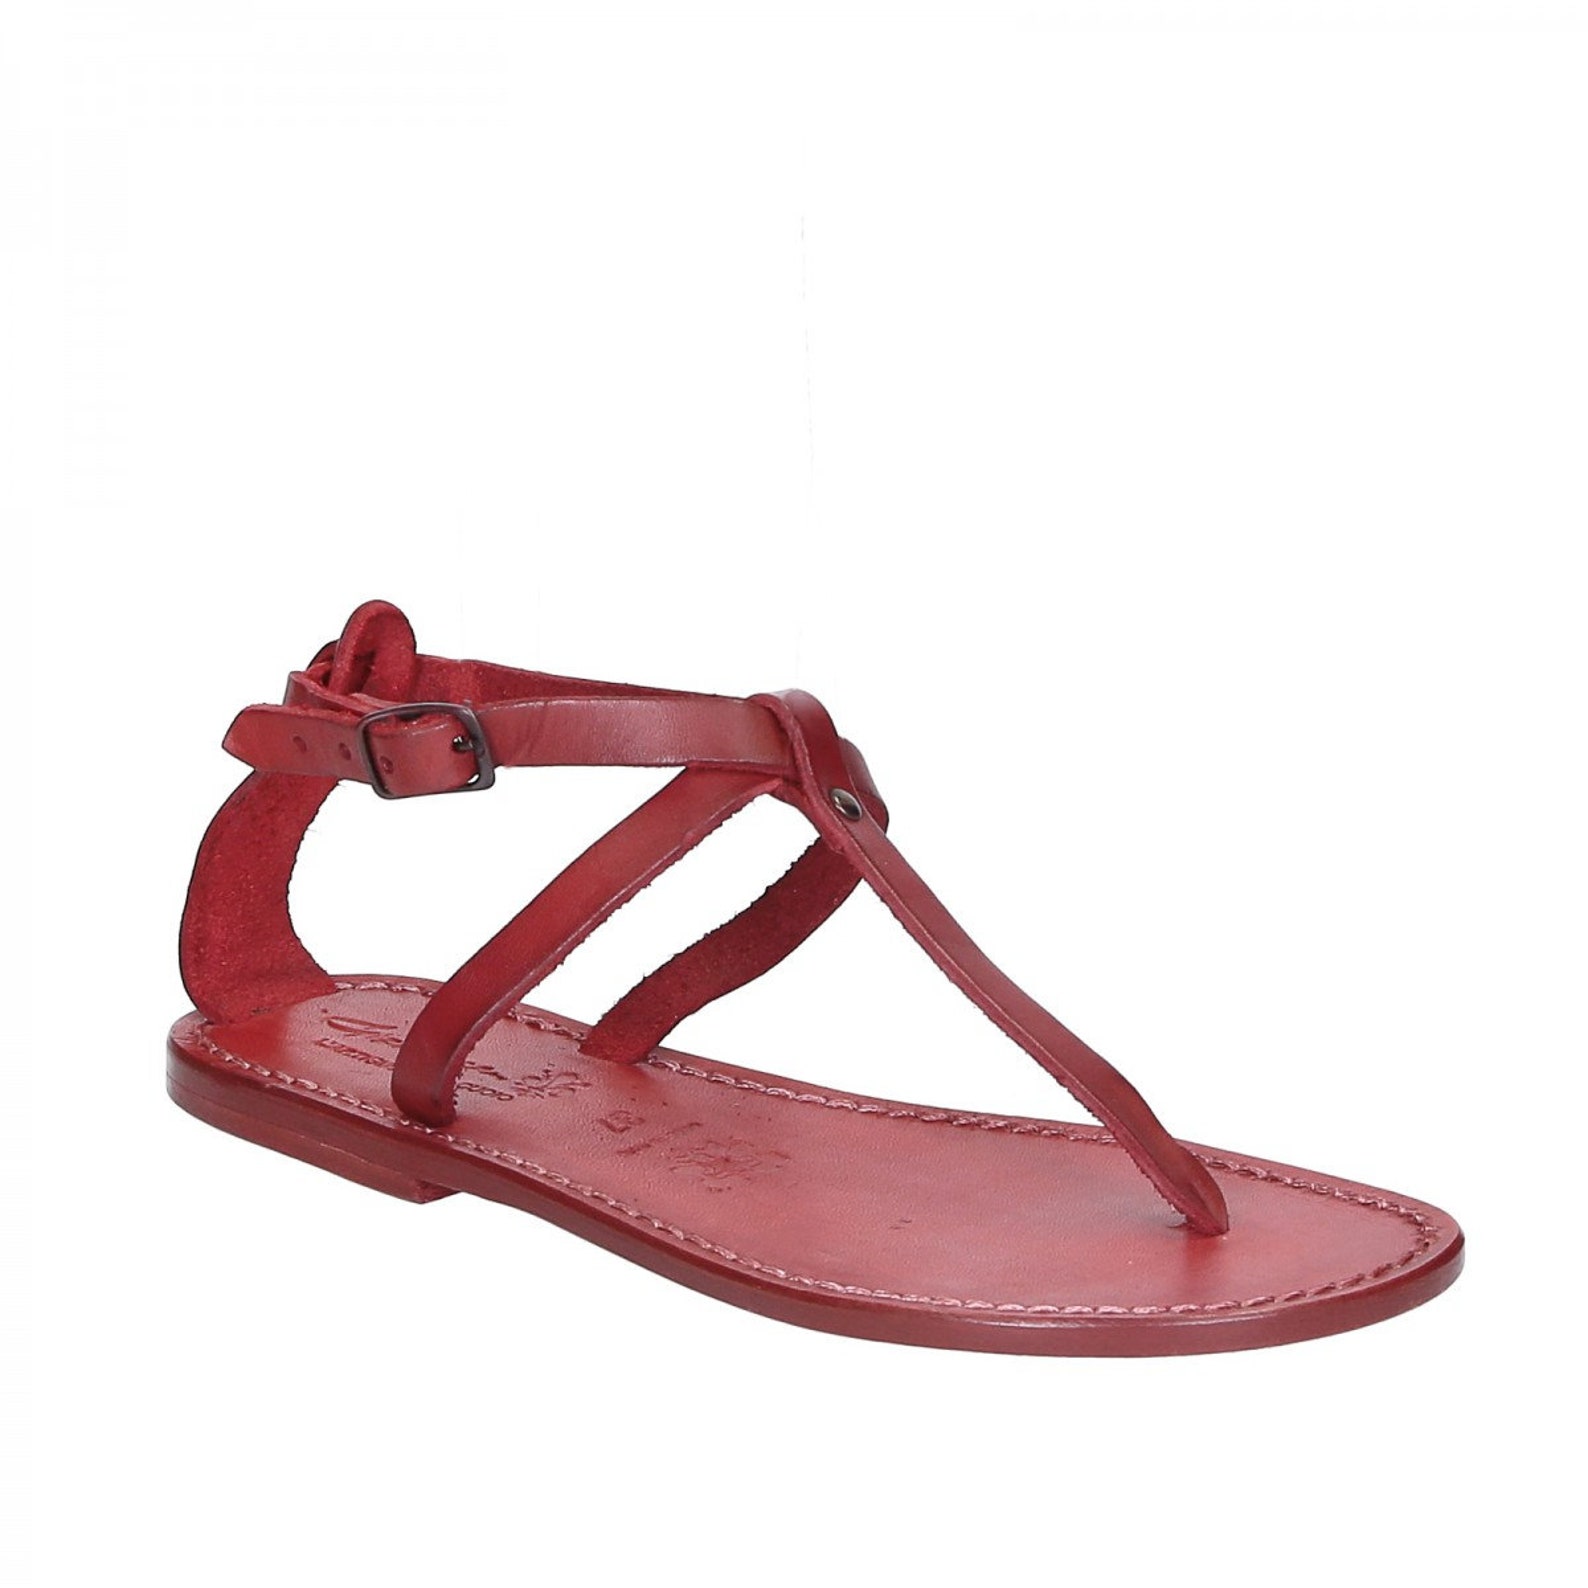 Women's T-strap Sandals in Red Leather Handmade in Italy - Etsy UK